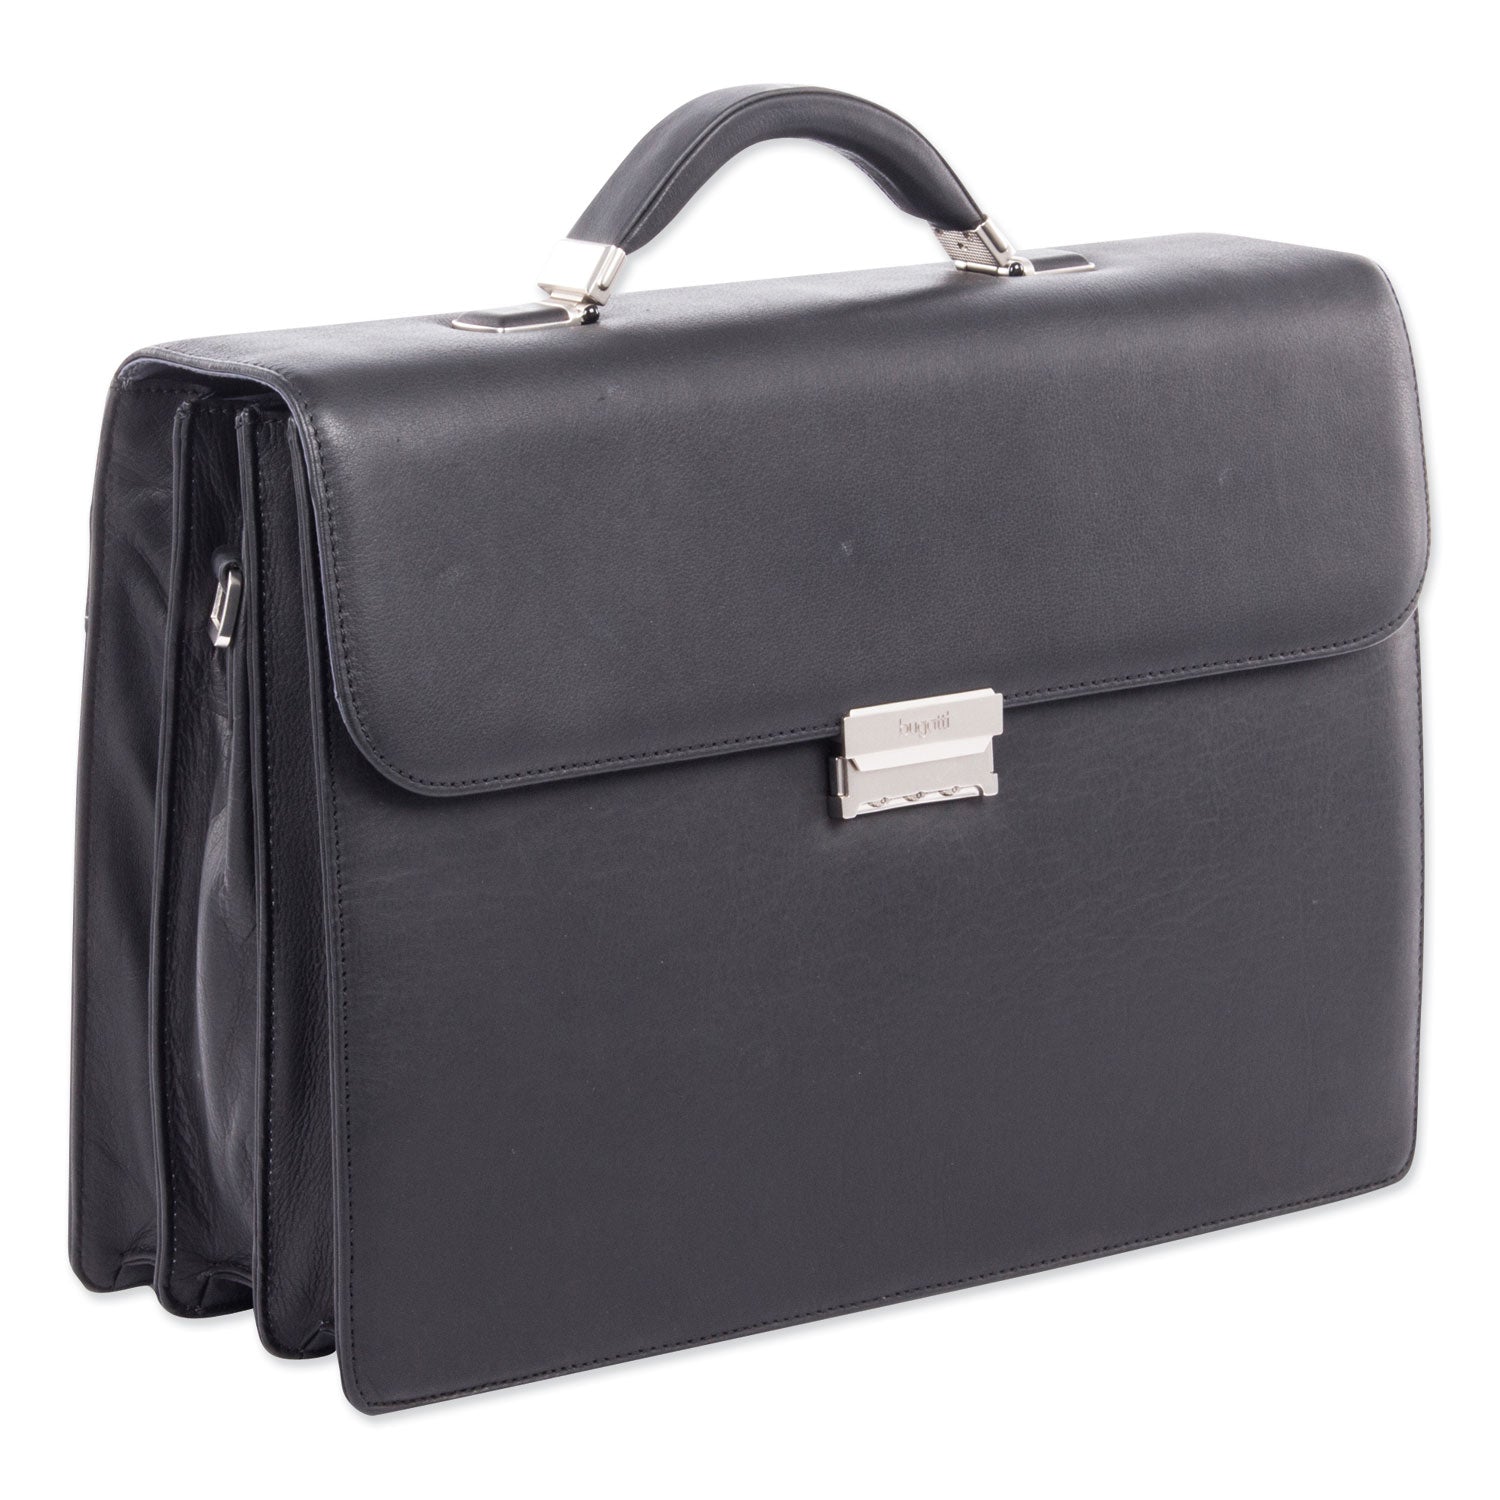 milestone-briefcase-fits-devices-up-to-156-leather-5-x-5-x-12-black_swz49545801sm - 1